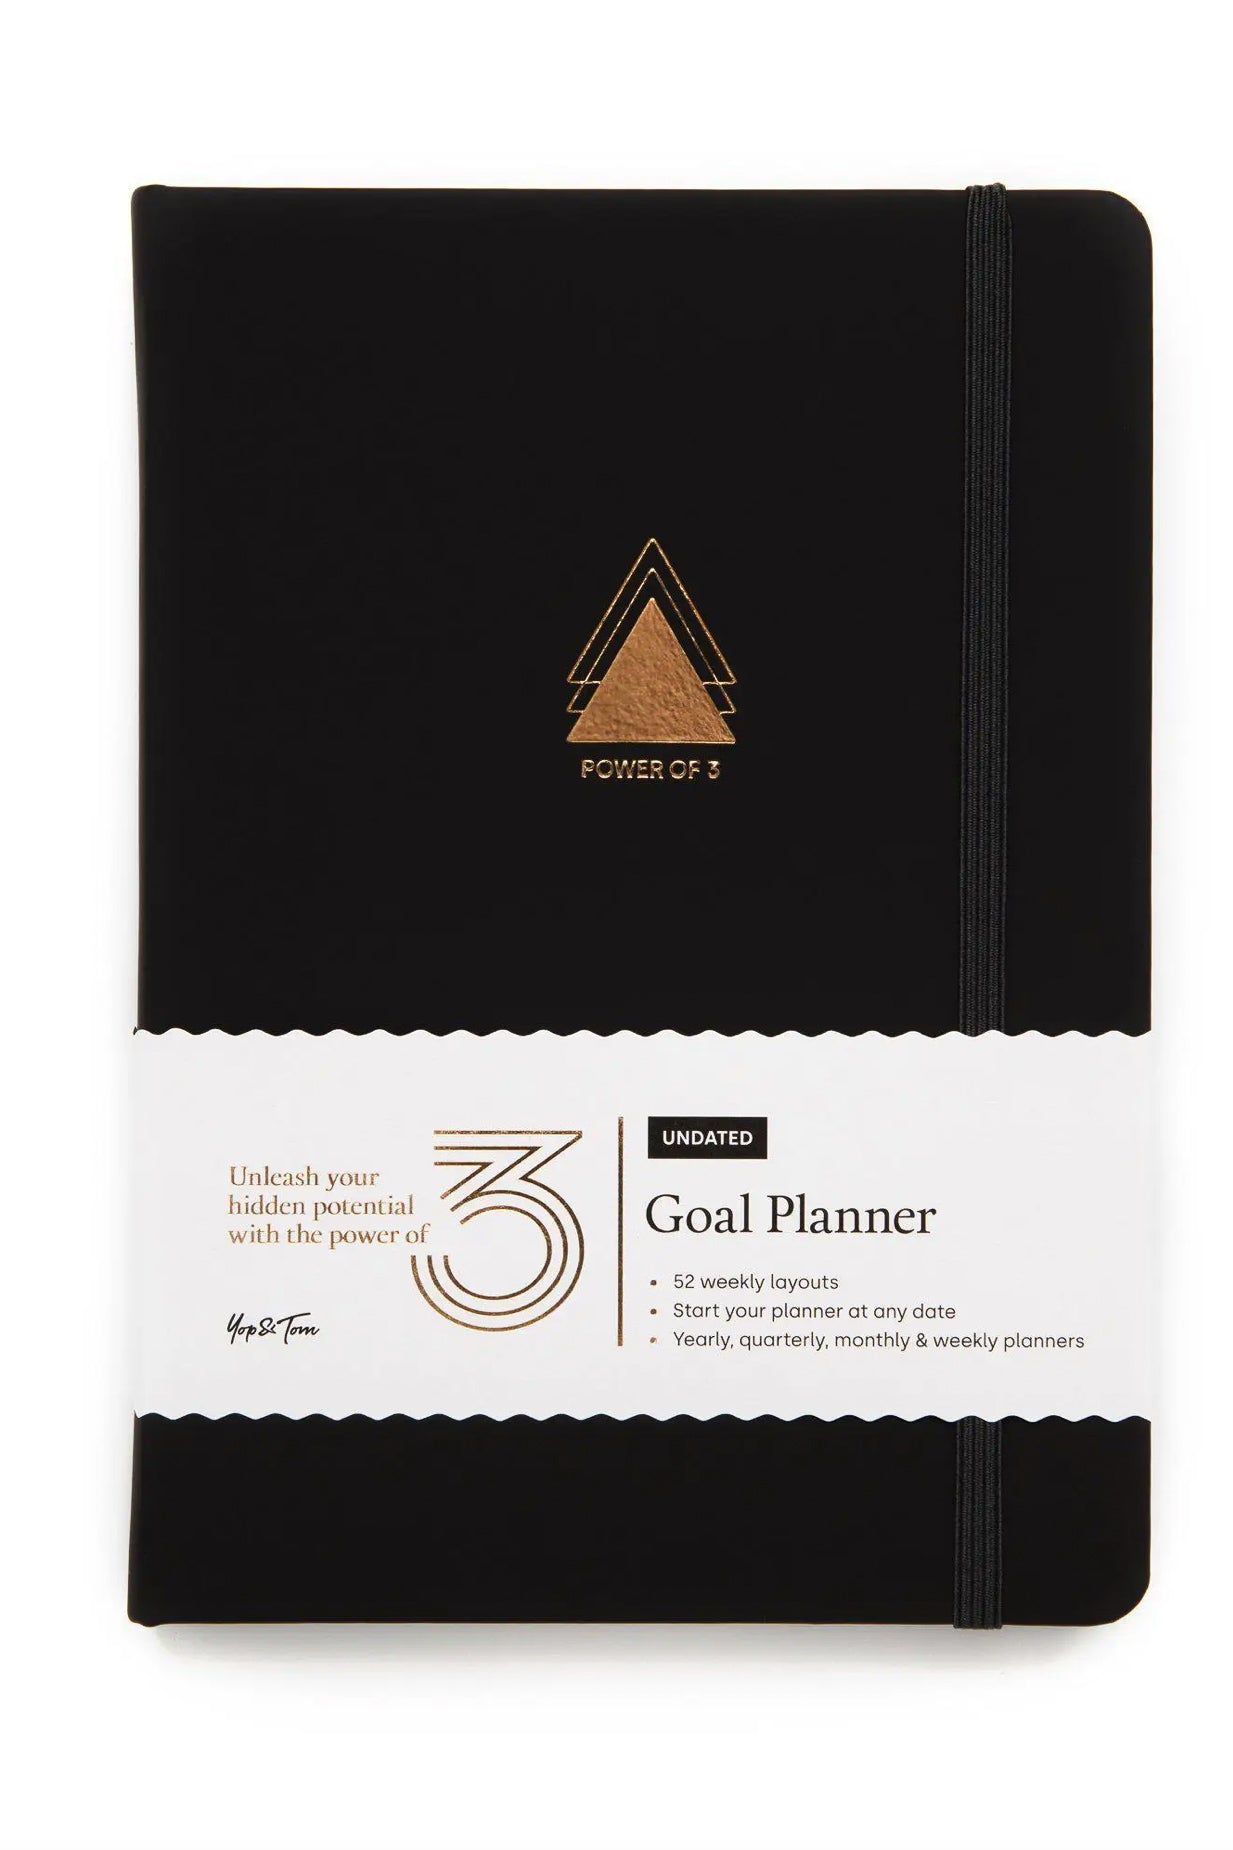 Power of 3 Goal Planner - Undated